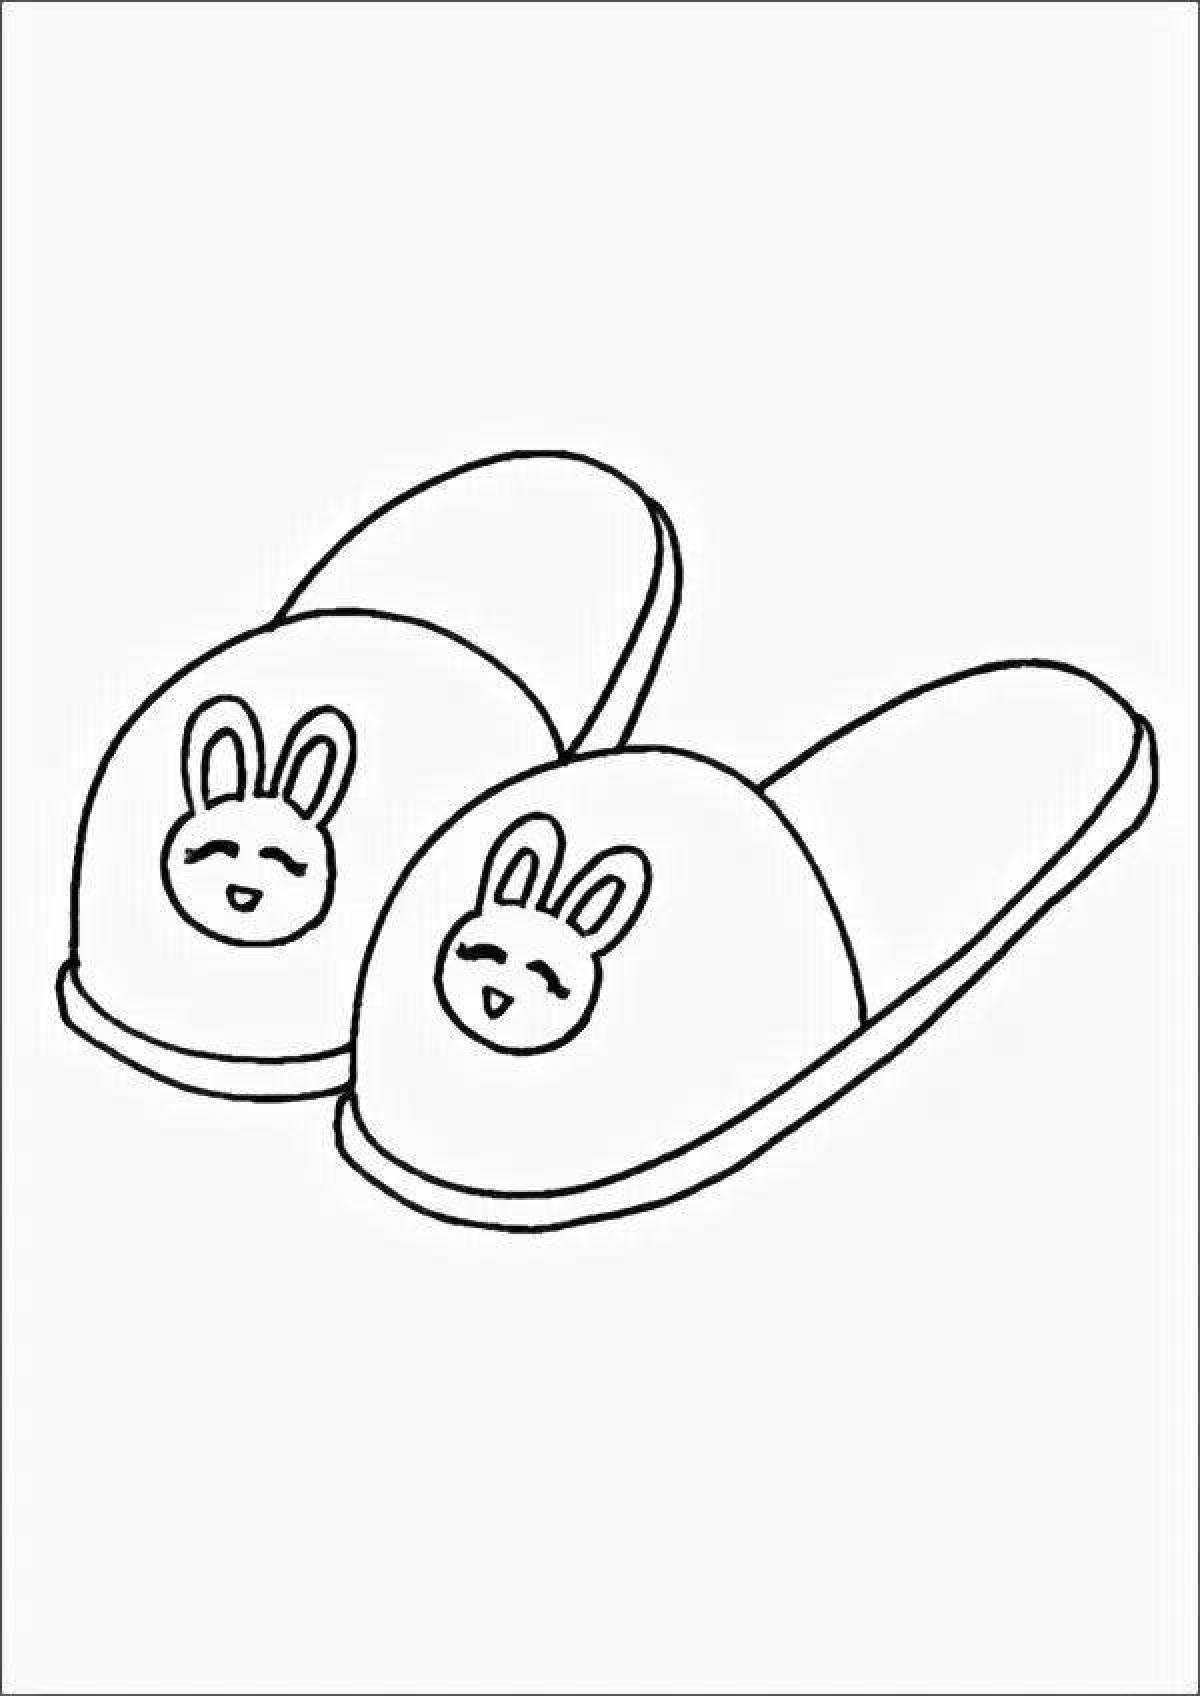 Coloring book bold slippers